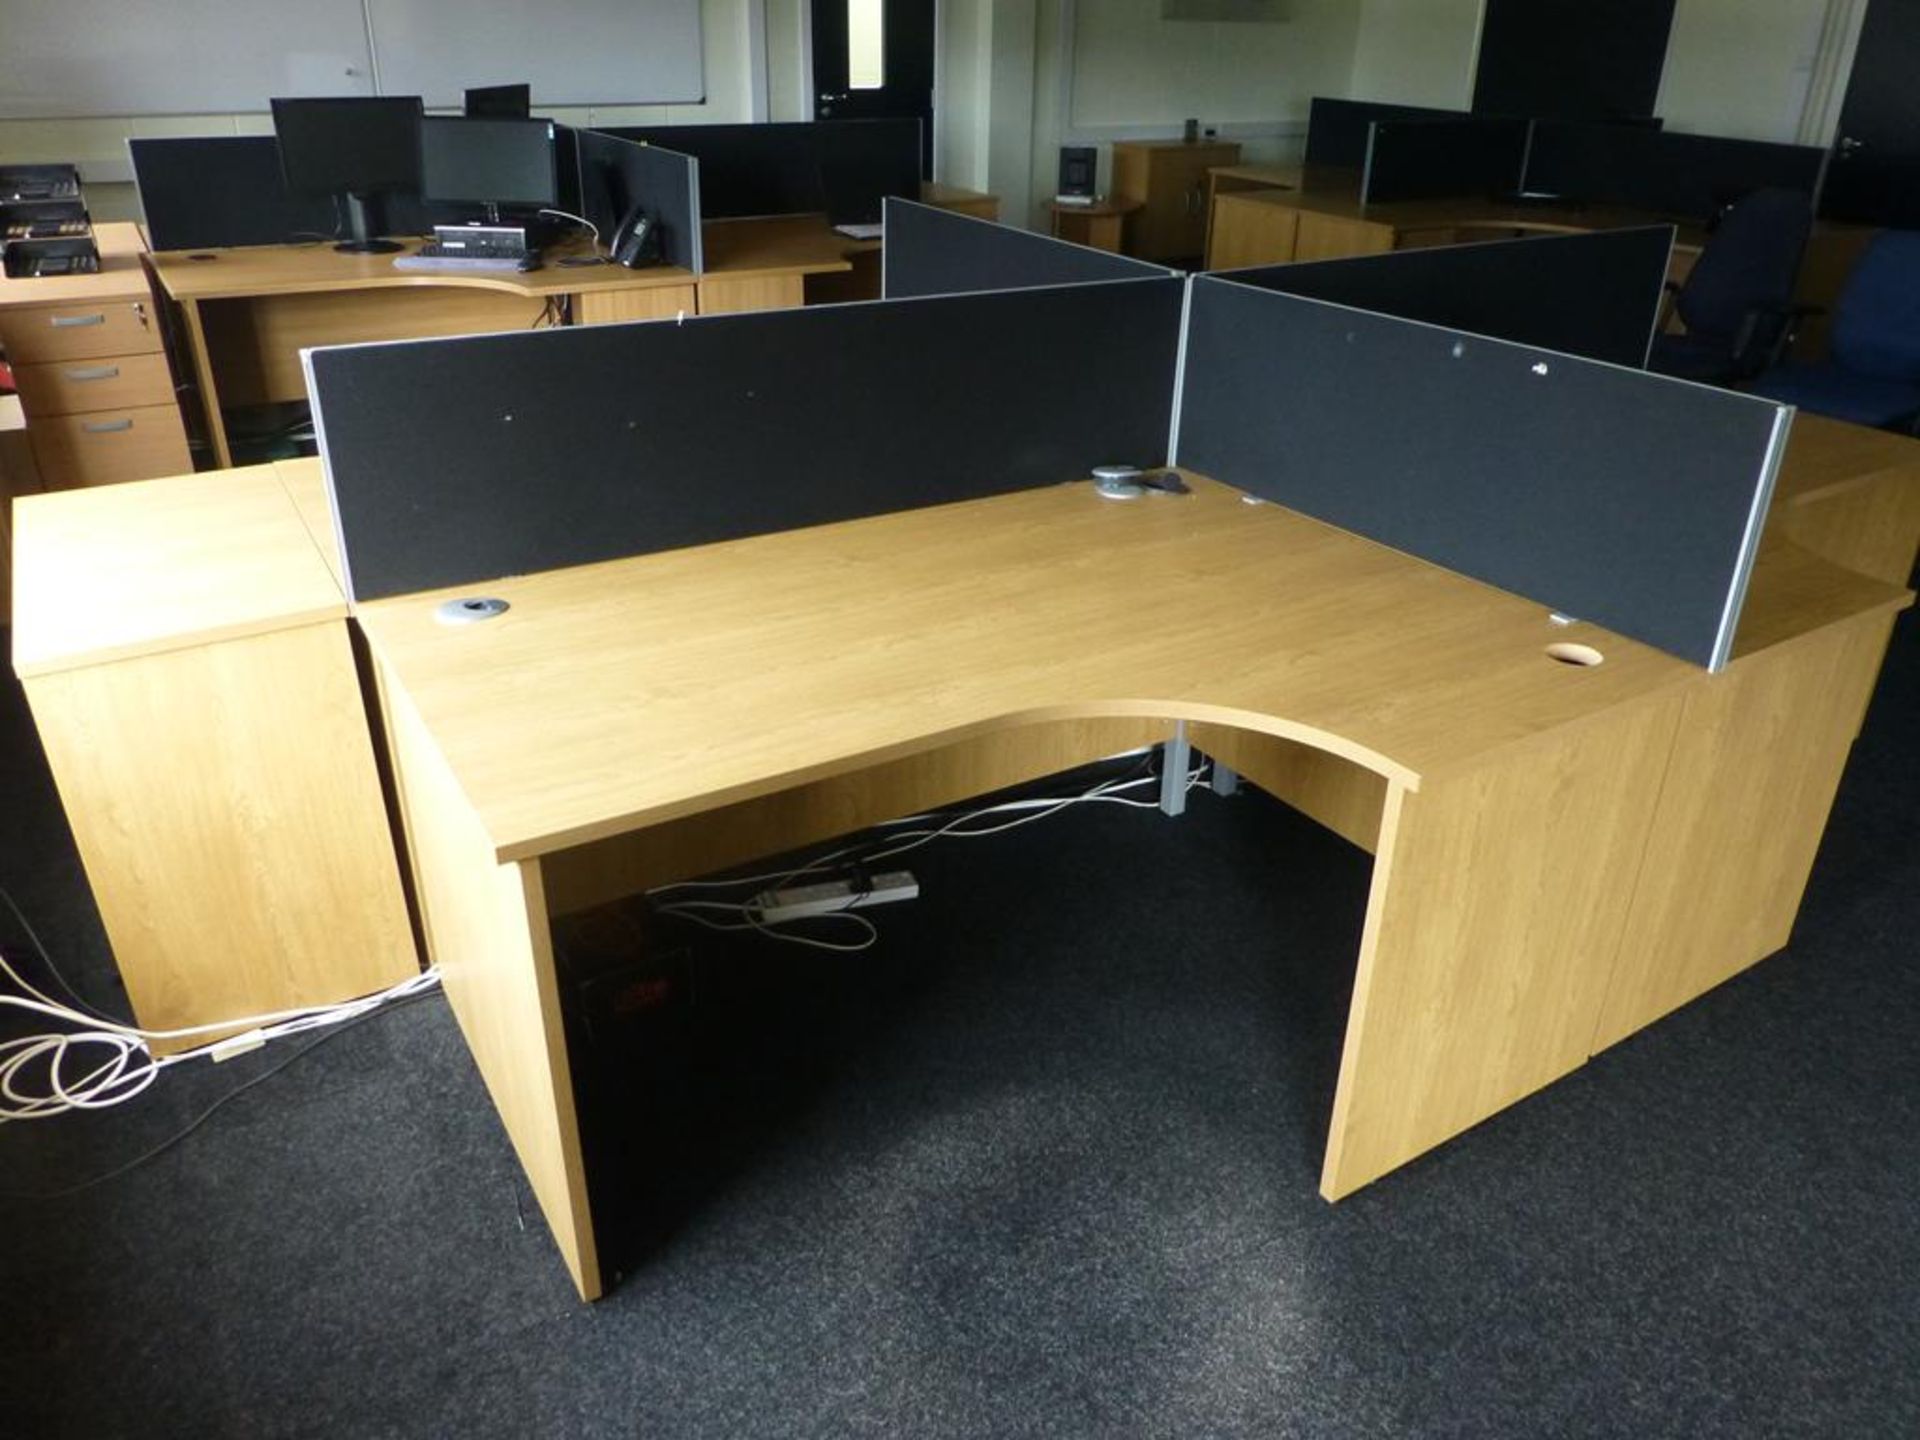 4 cherry effect 1600mm x 1200mm workstations with 1 matching 3 drawer pedestal and 4 x 400mm high